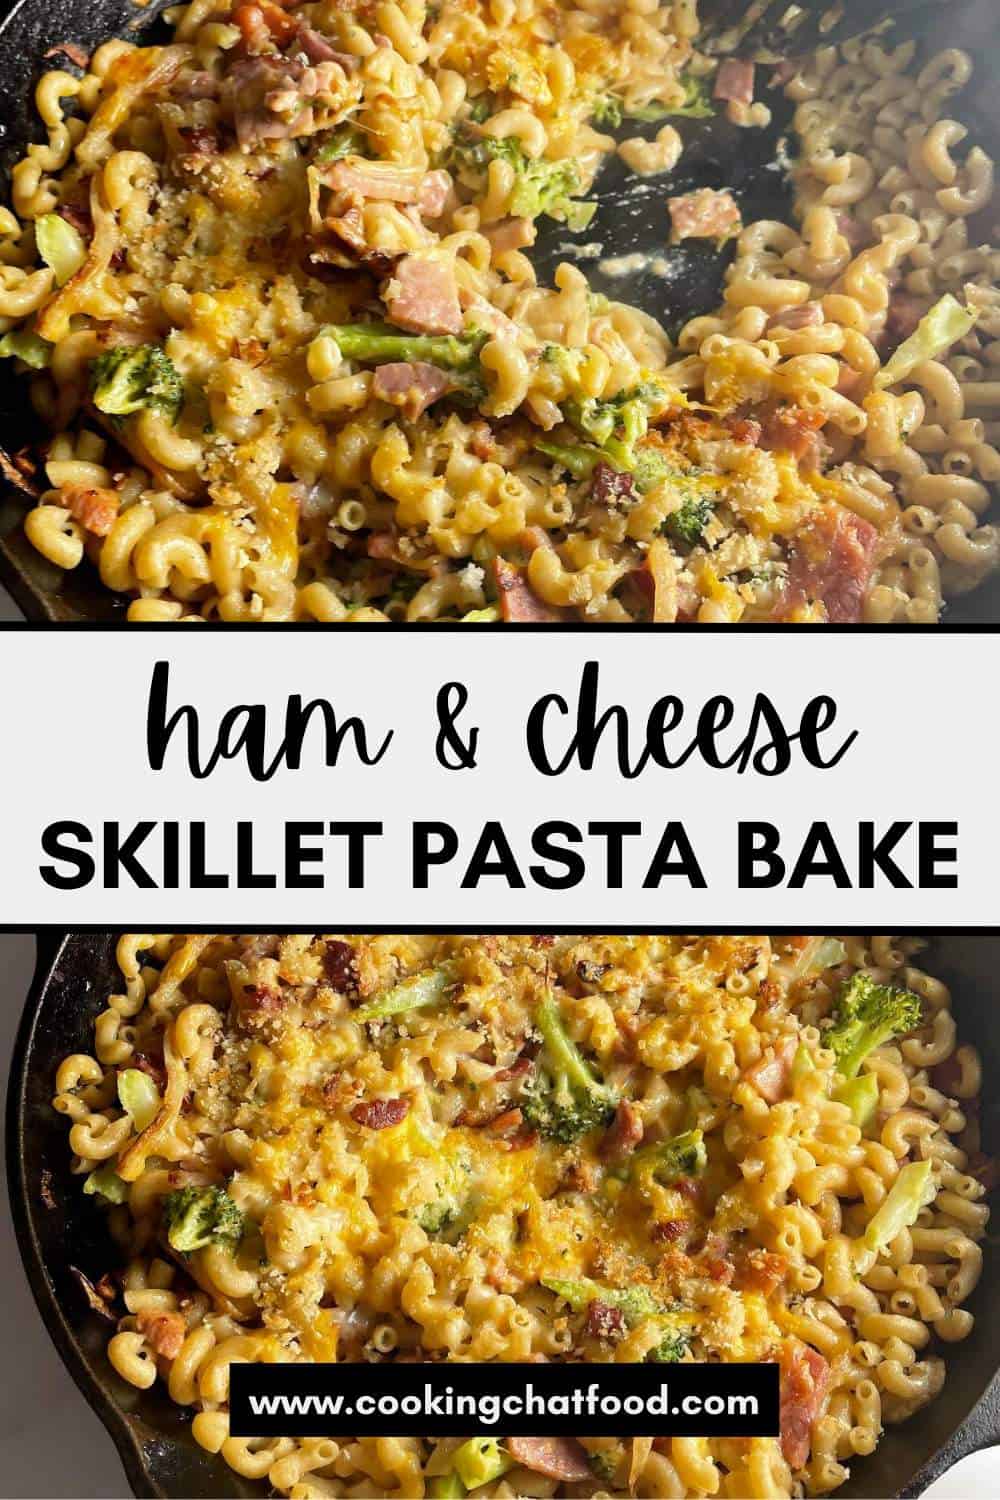 ham and cheese pasta bake in a skillet.